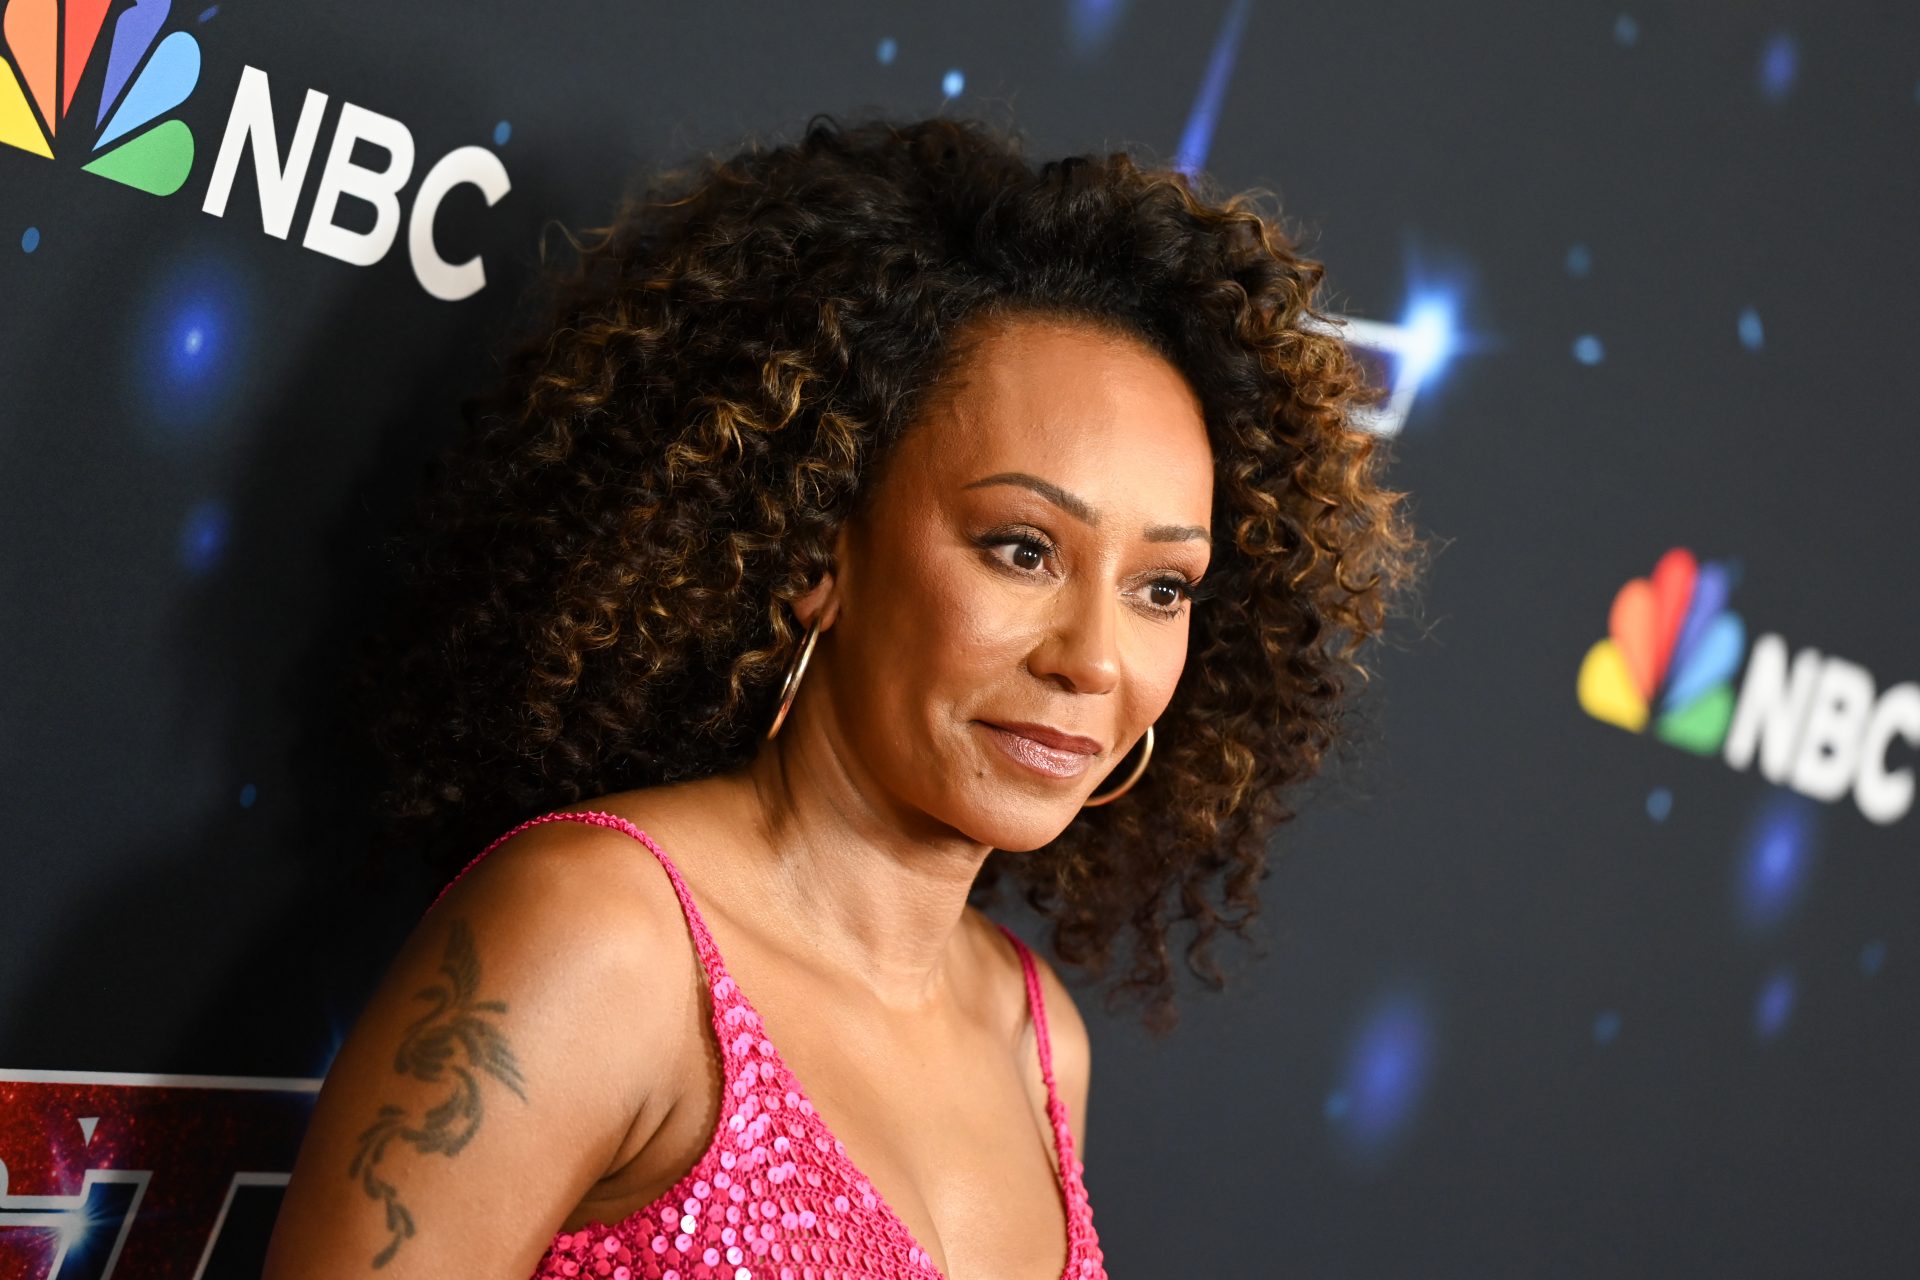 Spice Girl Mel B reveals the hell she experienced with her ex-husband